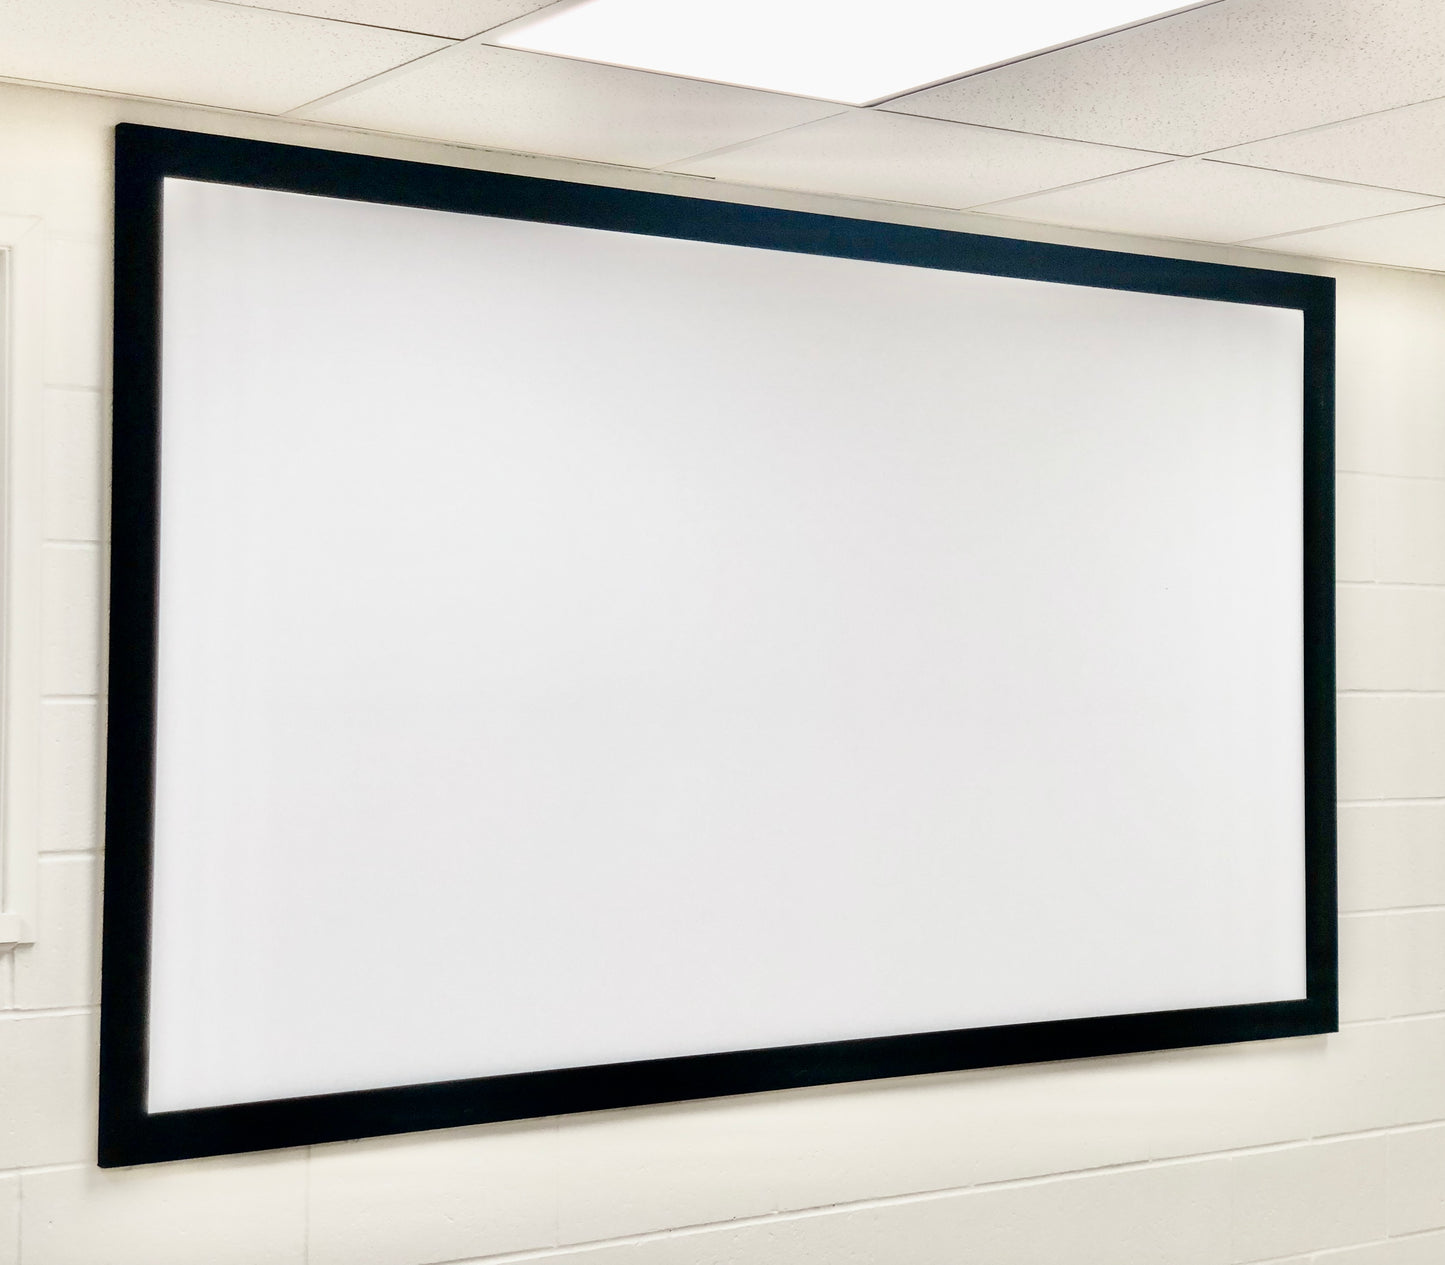 120" TEXONIC Acoustically Transparent Fixed Projector Screen